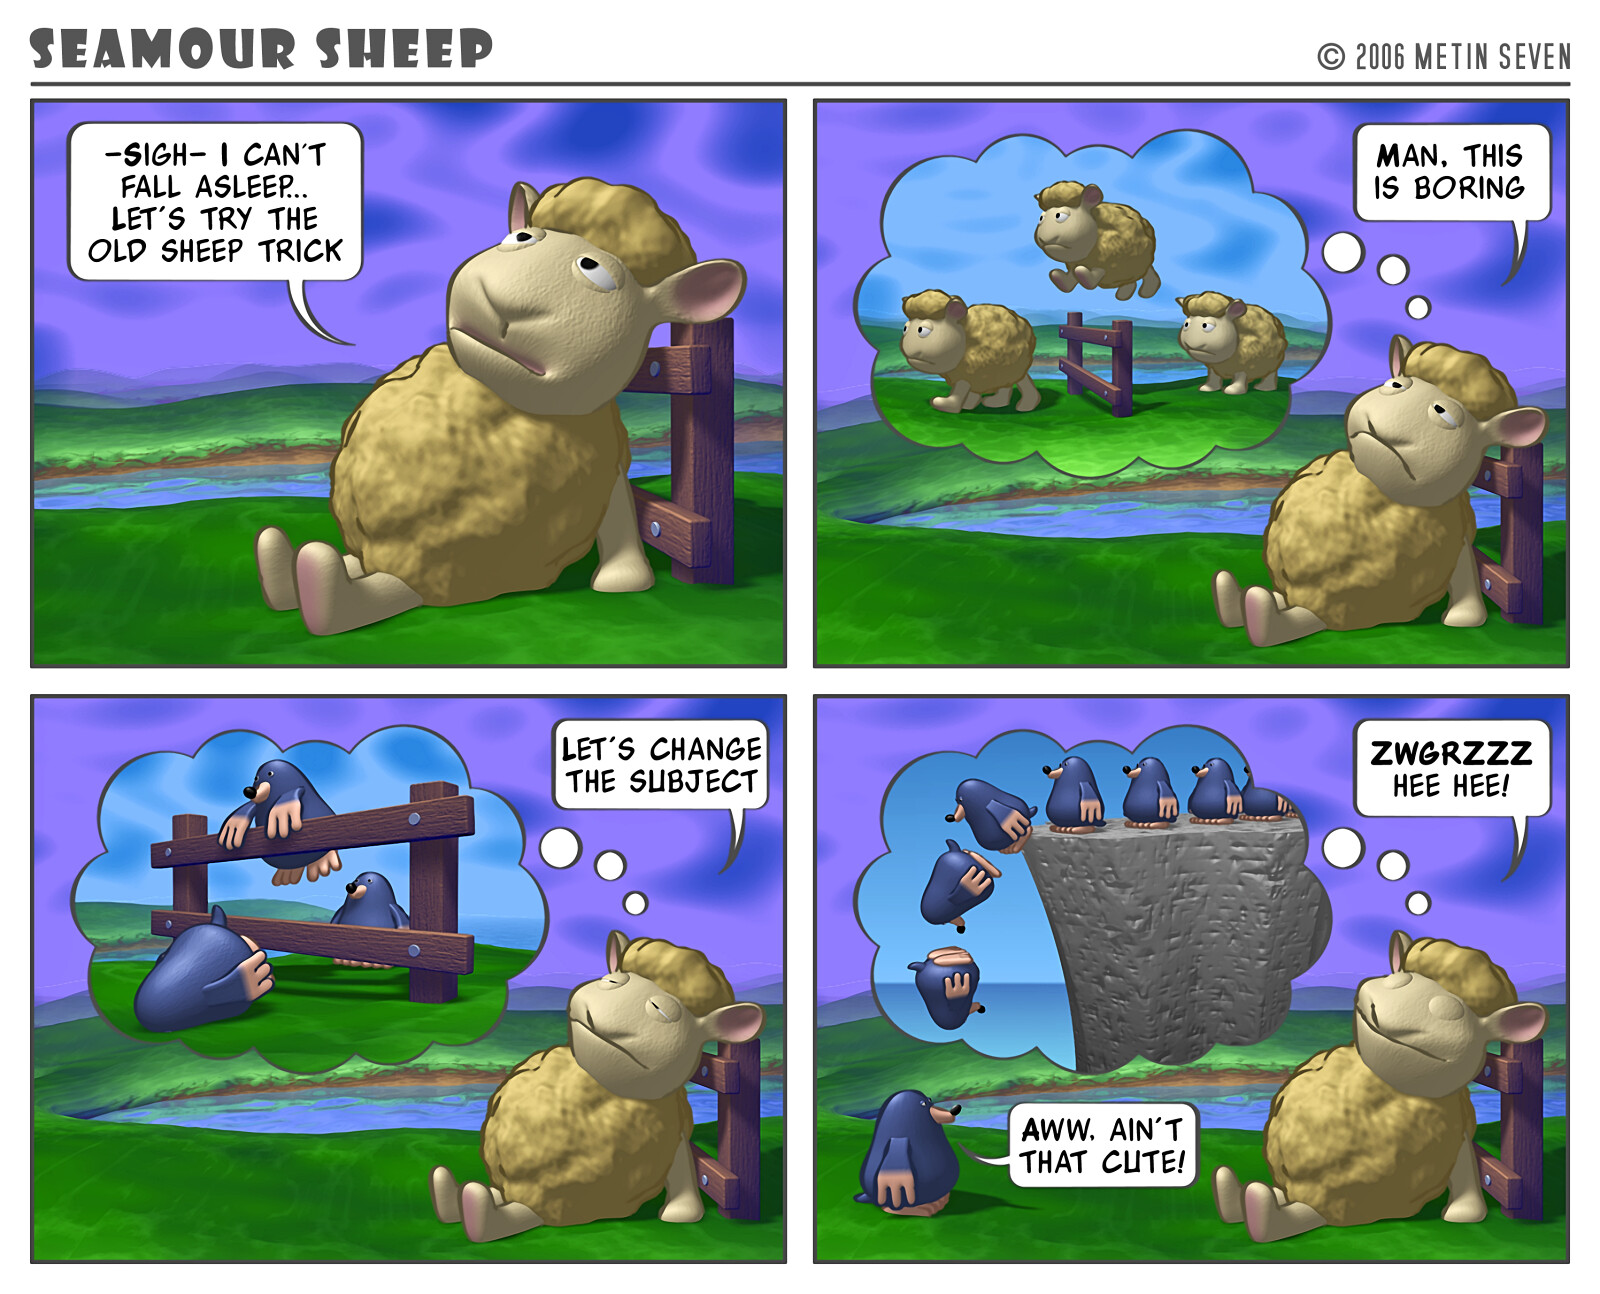 Seamour Sheep and Marty Mole comic strip episode: Insomnia